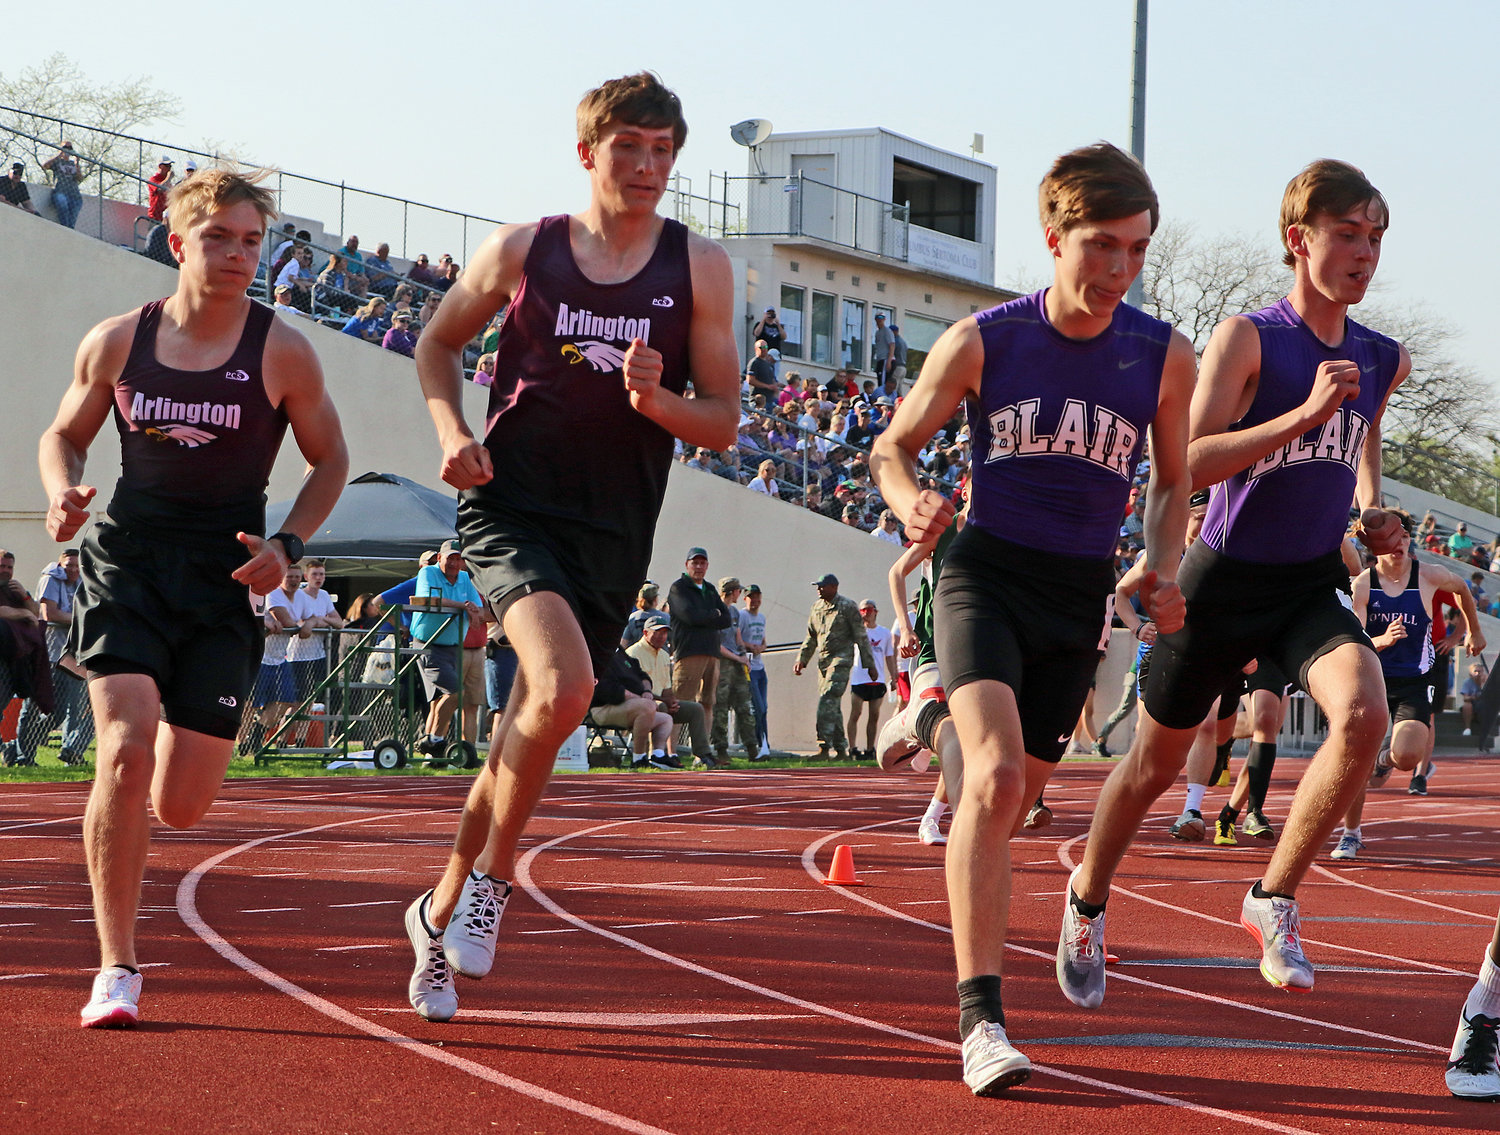 36 county athletes set for 2-day Class B meet